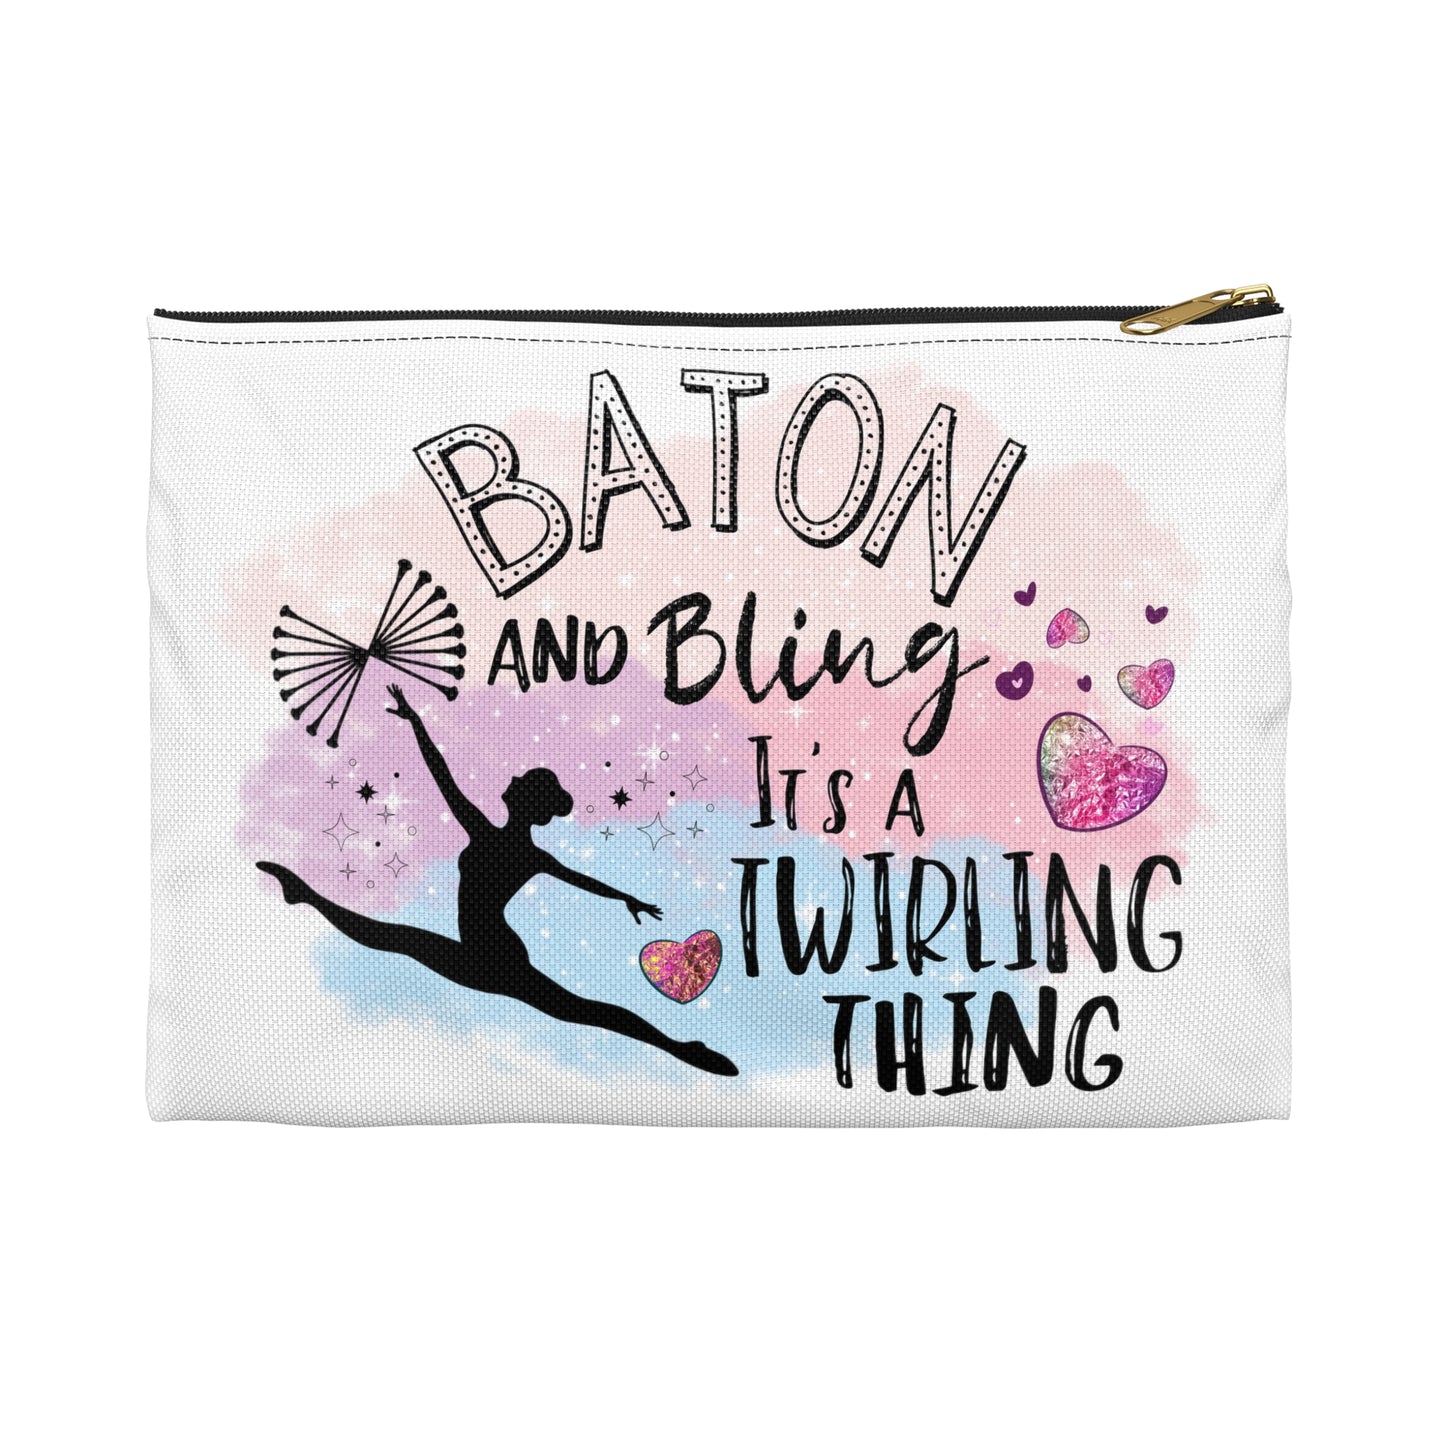 Baton and Bling it's a Twirling Thing Makeup and Accessory Bag, Baton Twirler Gift, Majorette Gift, Competition Gift